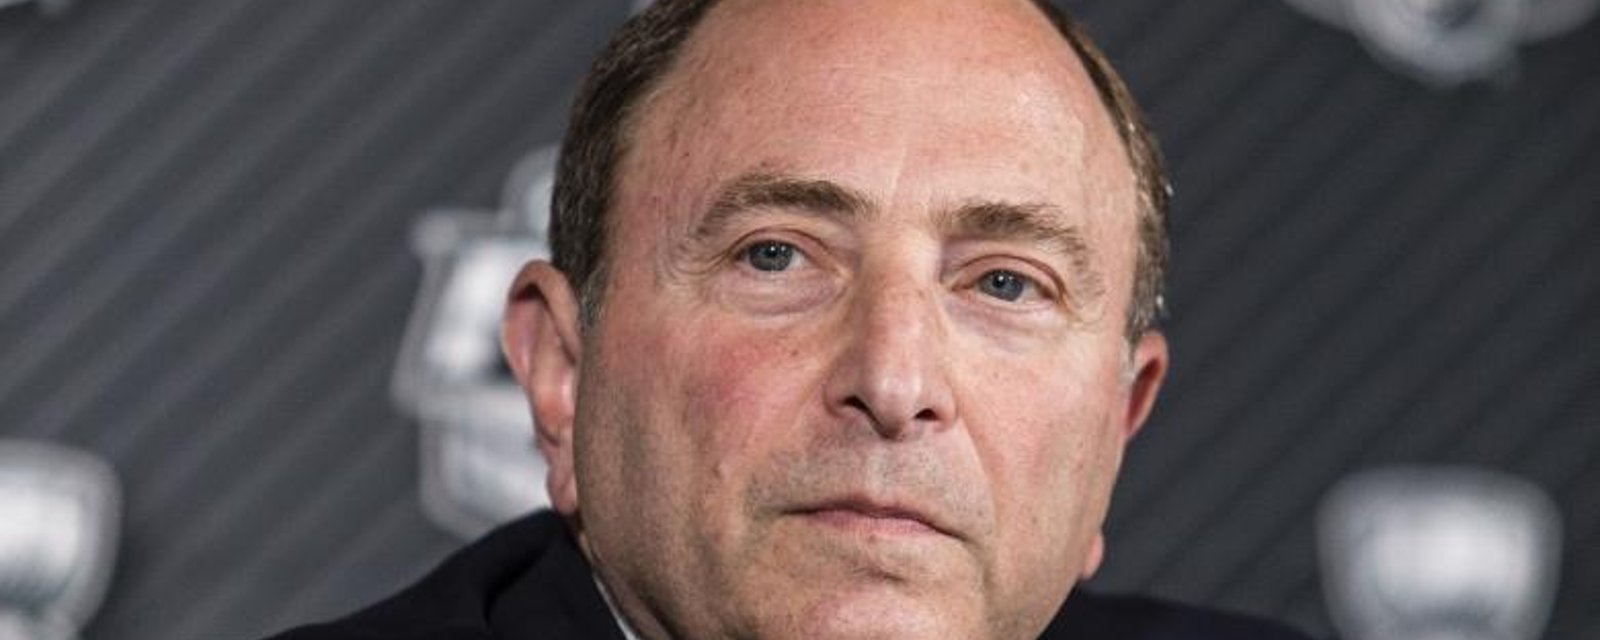 Court case reveals damning emails between top ranking NHL executives.